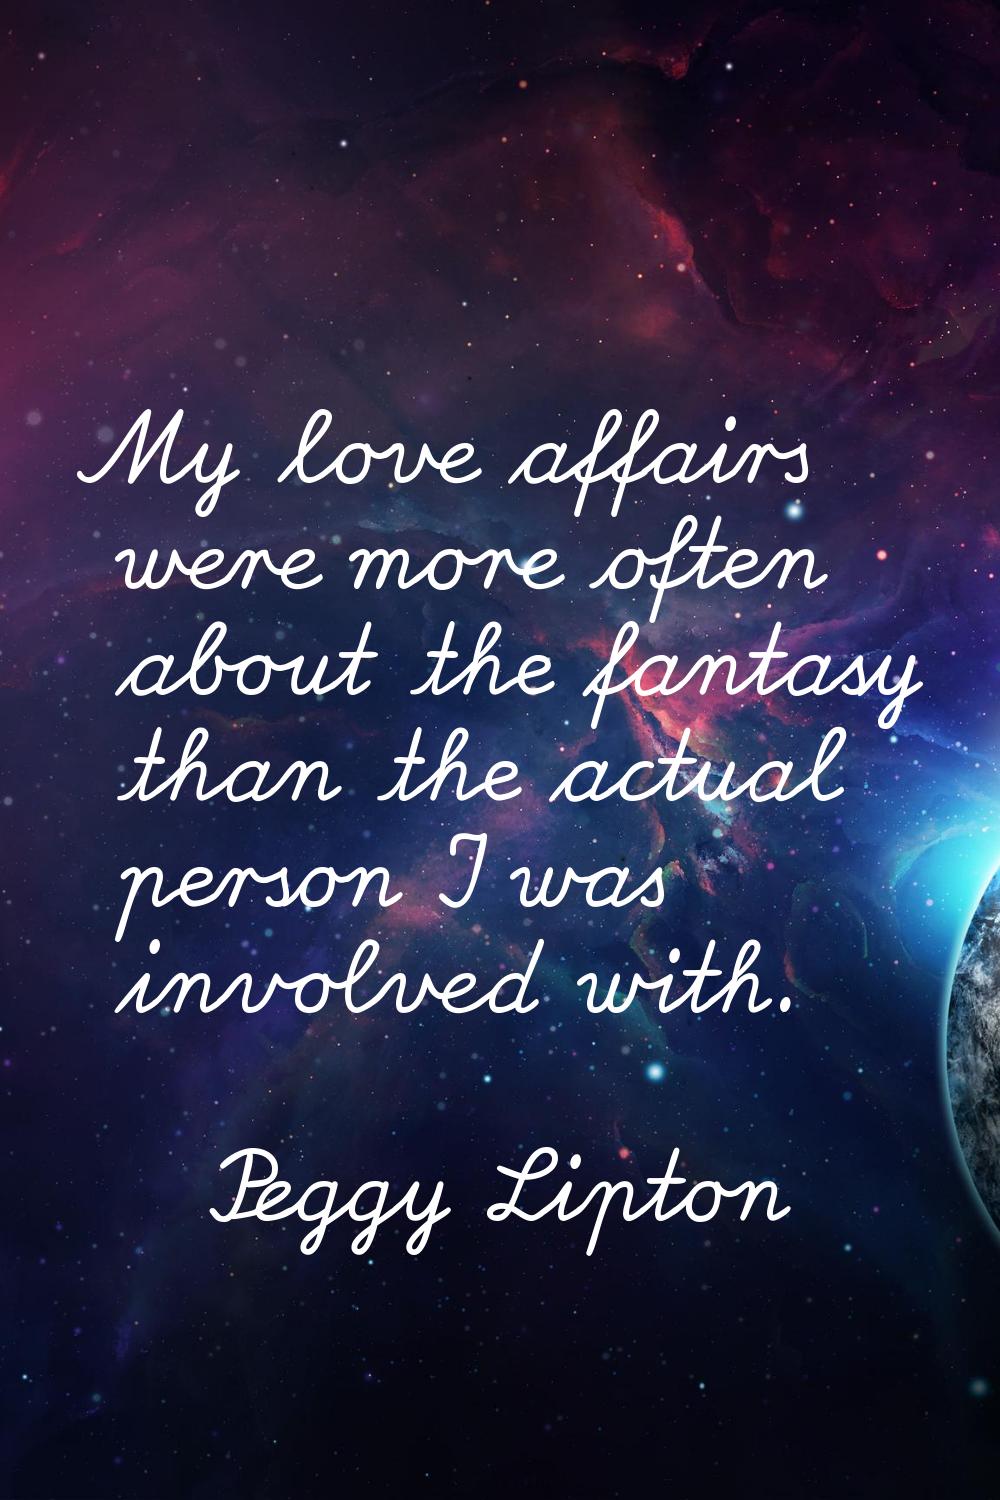 My love affairs were more often about the fantasy than the actual person I was involved with.